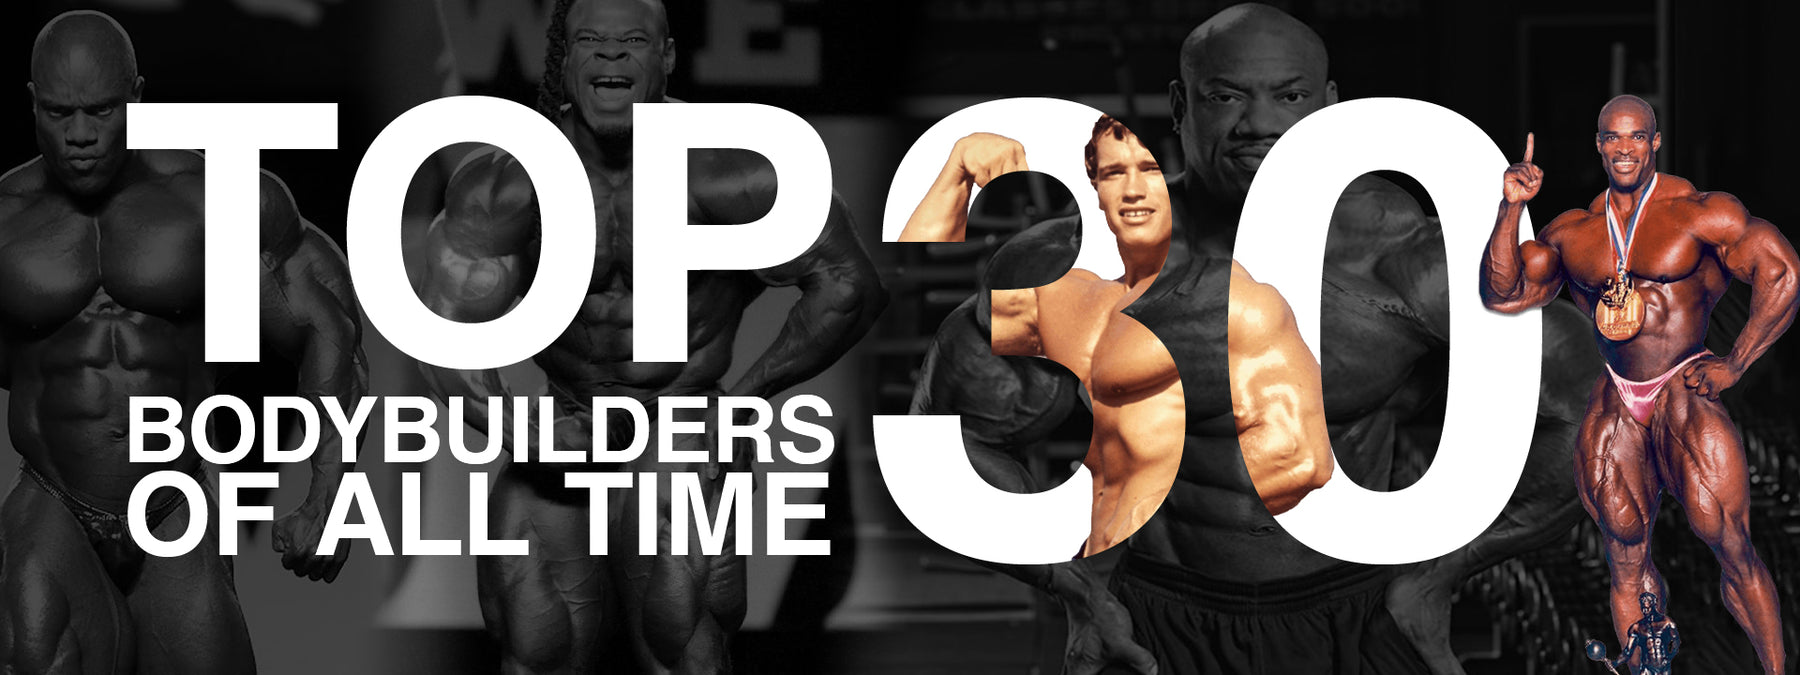 Top 30 Bodybuilders of All Time